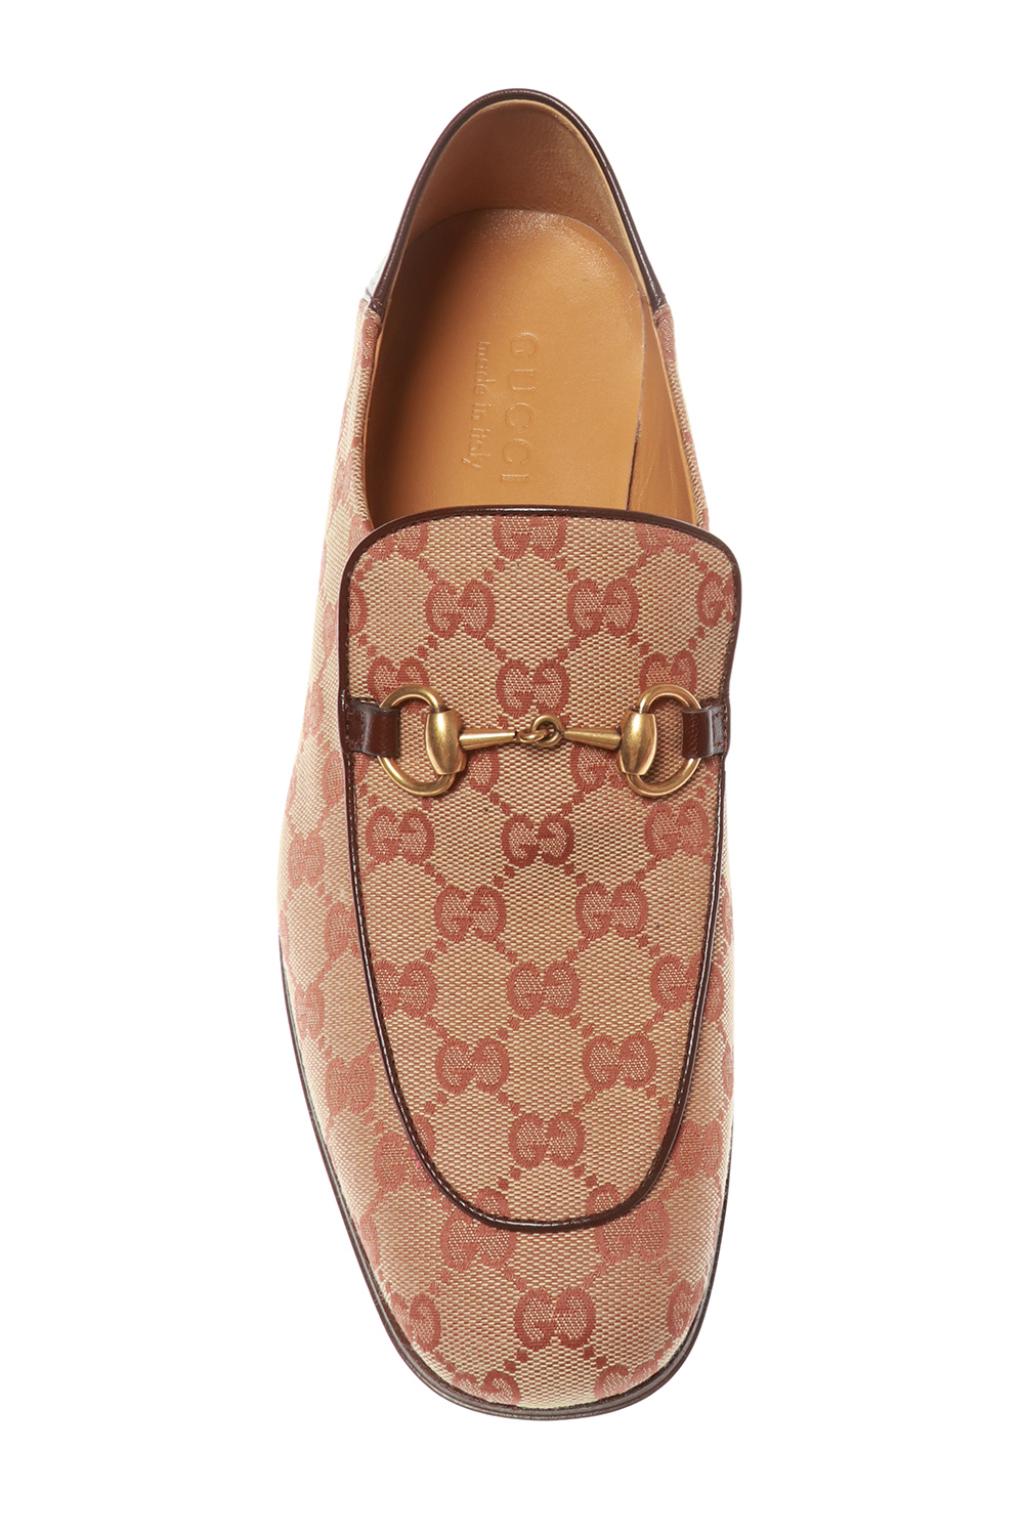 Gucci Logo loafers